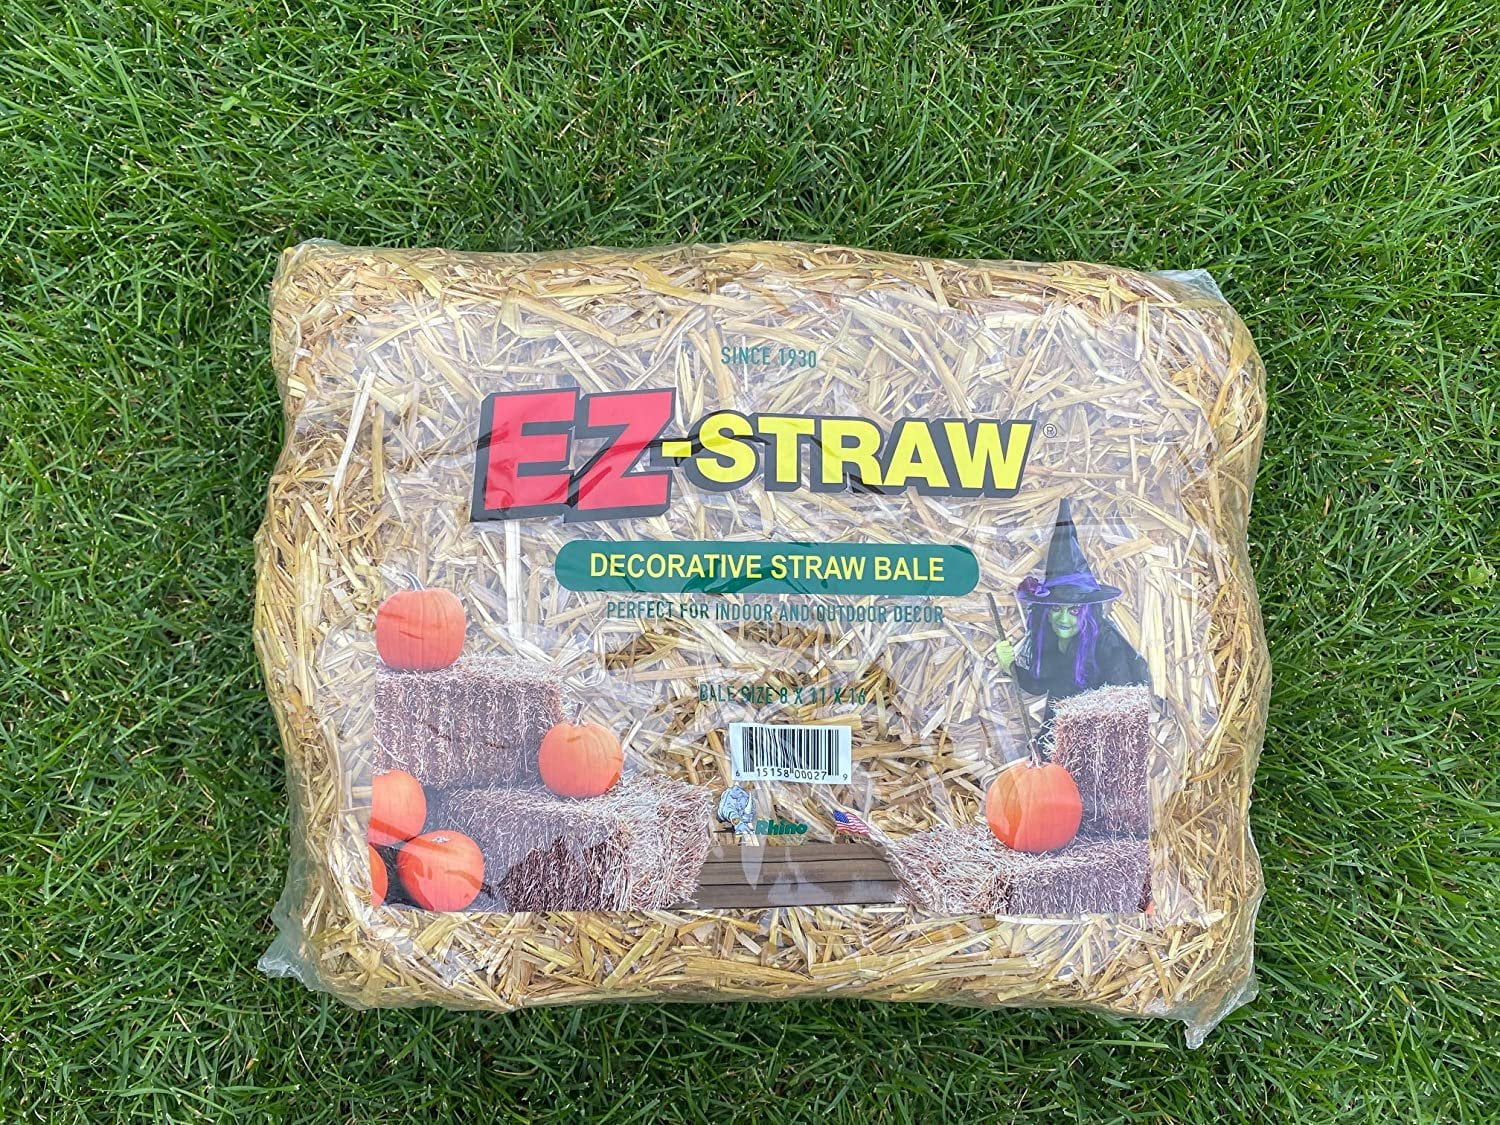 EZ-Straw Just Straw Clean Processed Straw Small Bale Multi Purpose Full Pack 1 cubic foot 